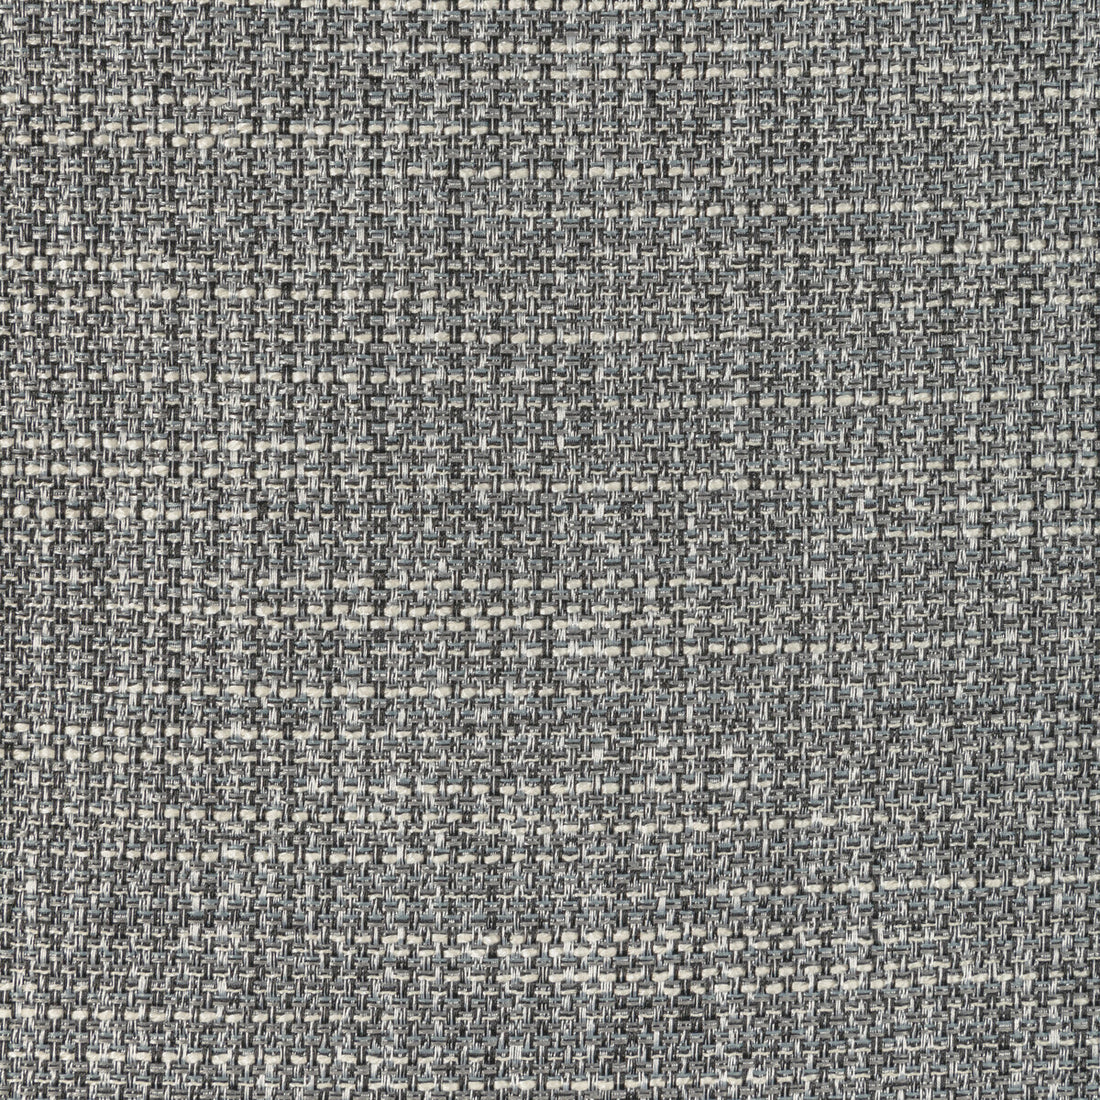 Luma Texture fabric in black ice color - pattern 4947.815.0 - by Kravet Contract in the Fr Window Luma Texture collection